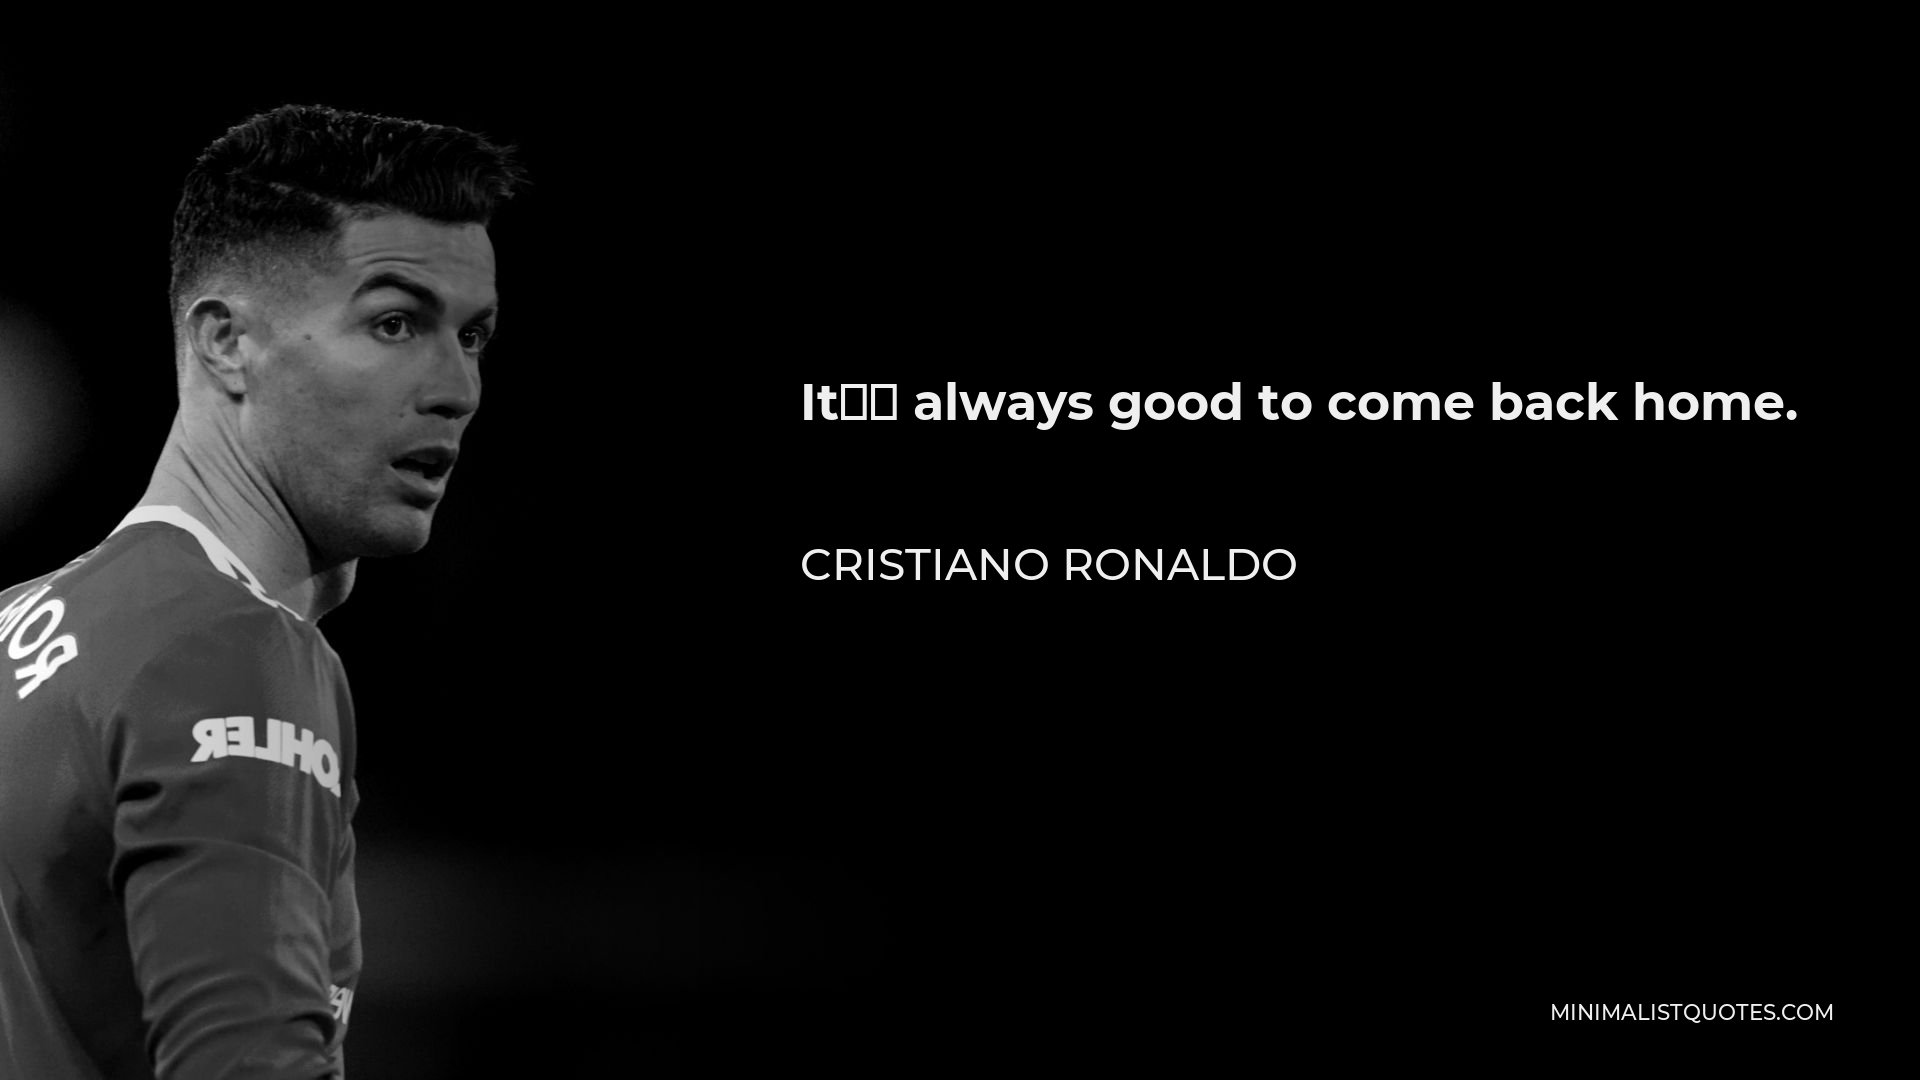 Cristiano Ronaldo Quote - It’s always good to come back home.